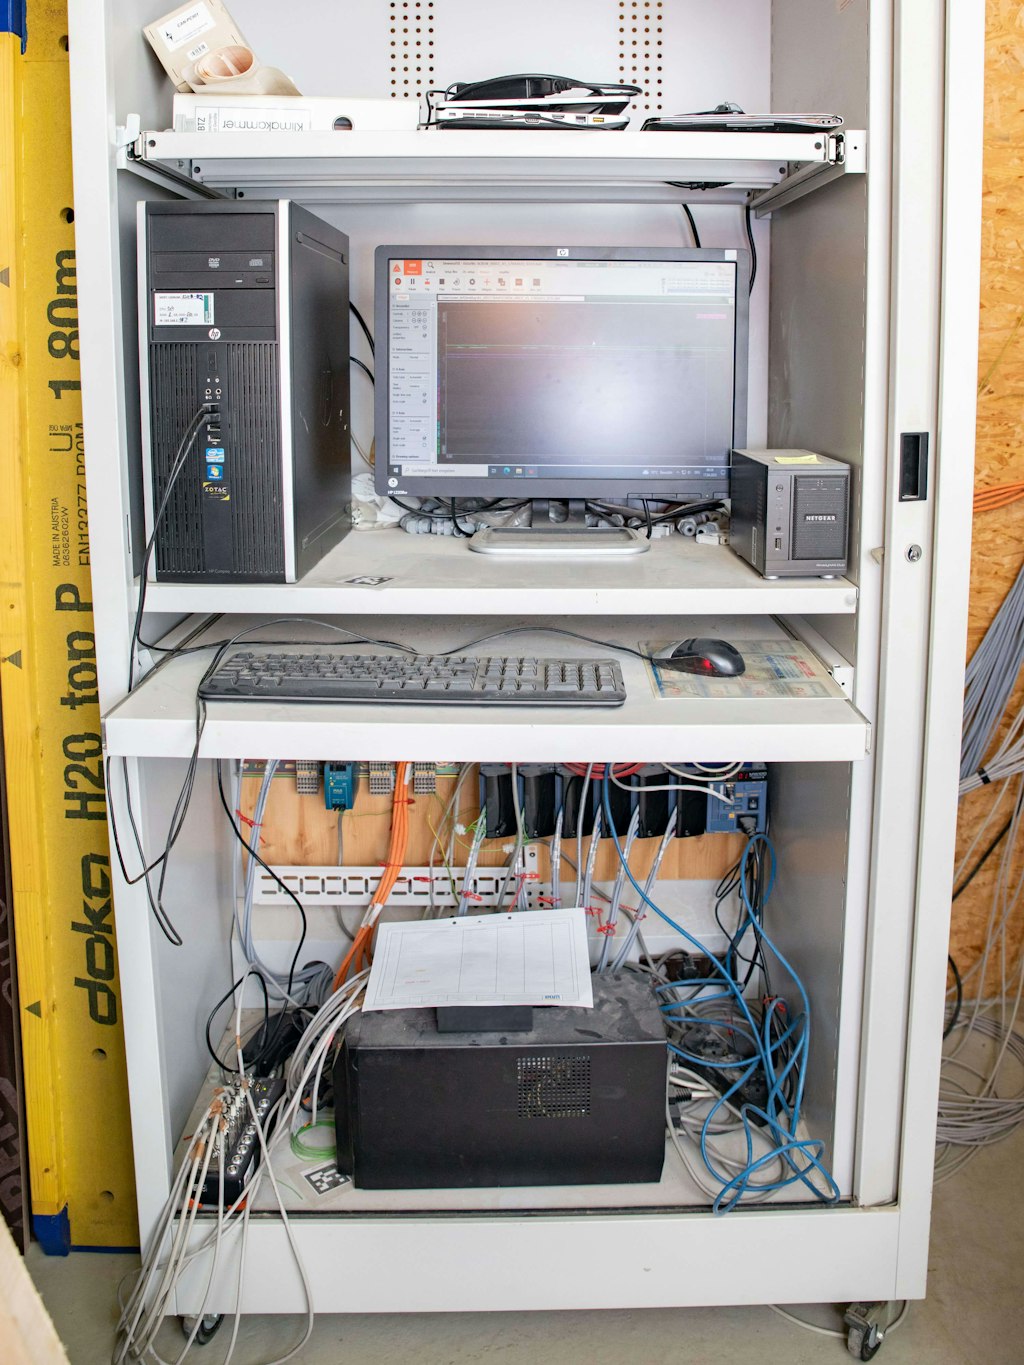 The Dewe-43 data acquisition system is in an appliance cabinet next to a computer